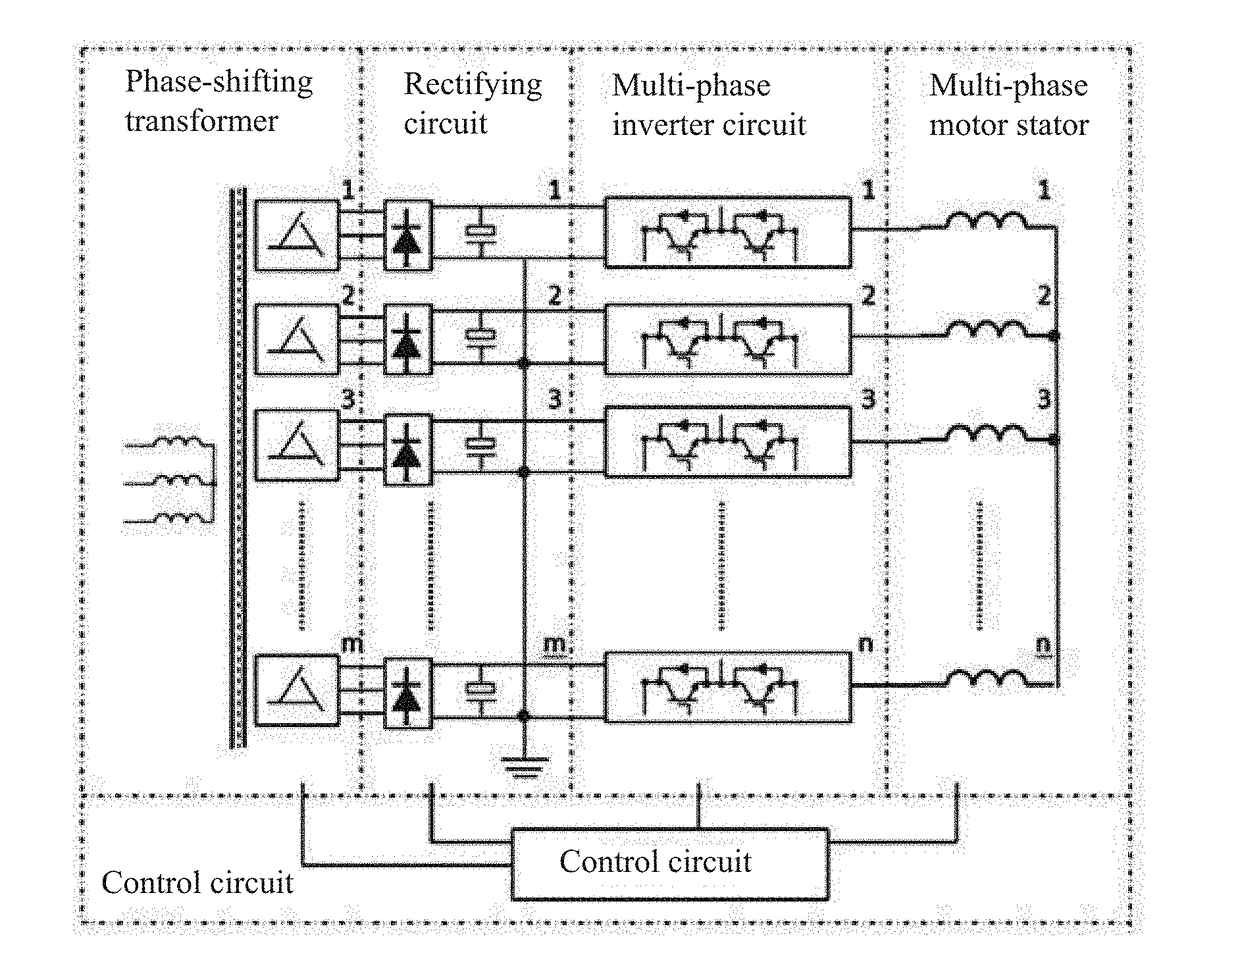 High-low-voltage conversion star multi-phase variable-frequency drive system